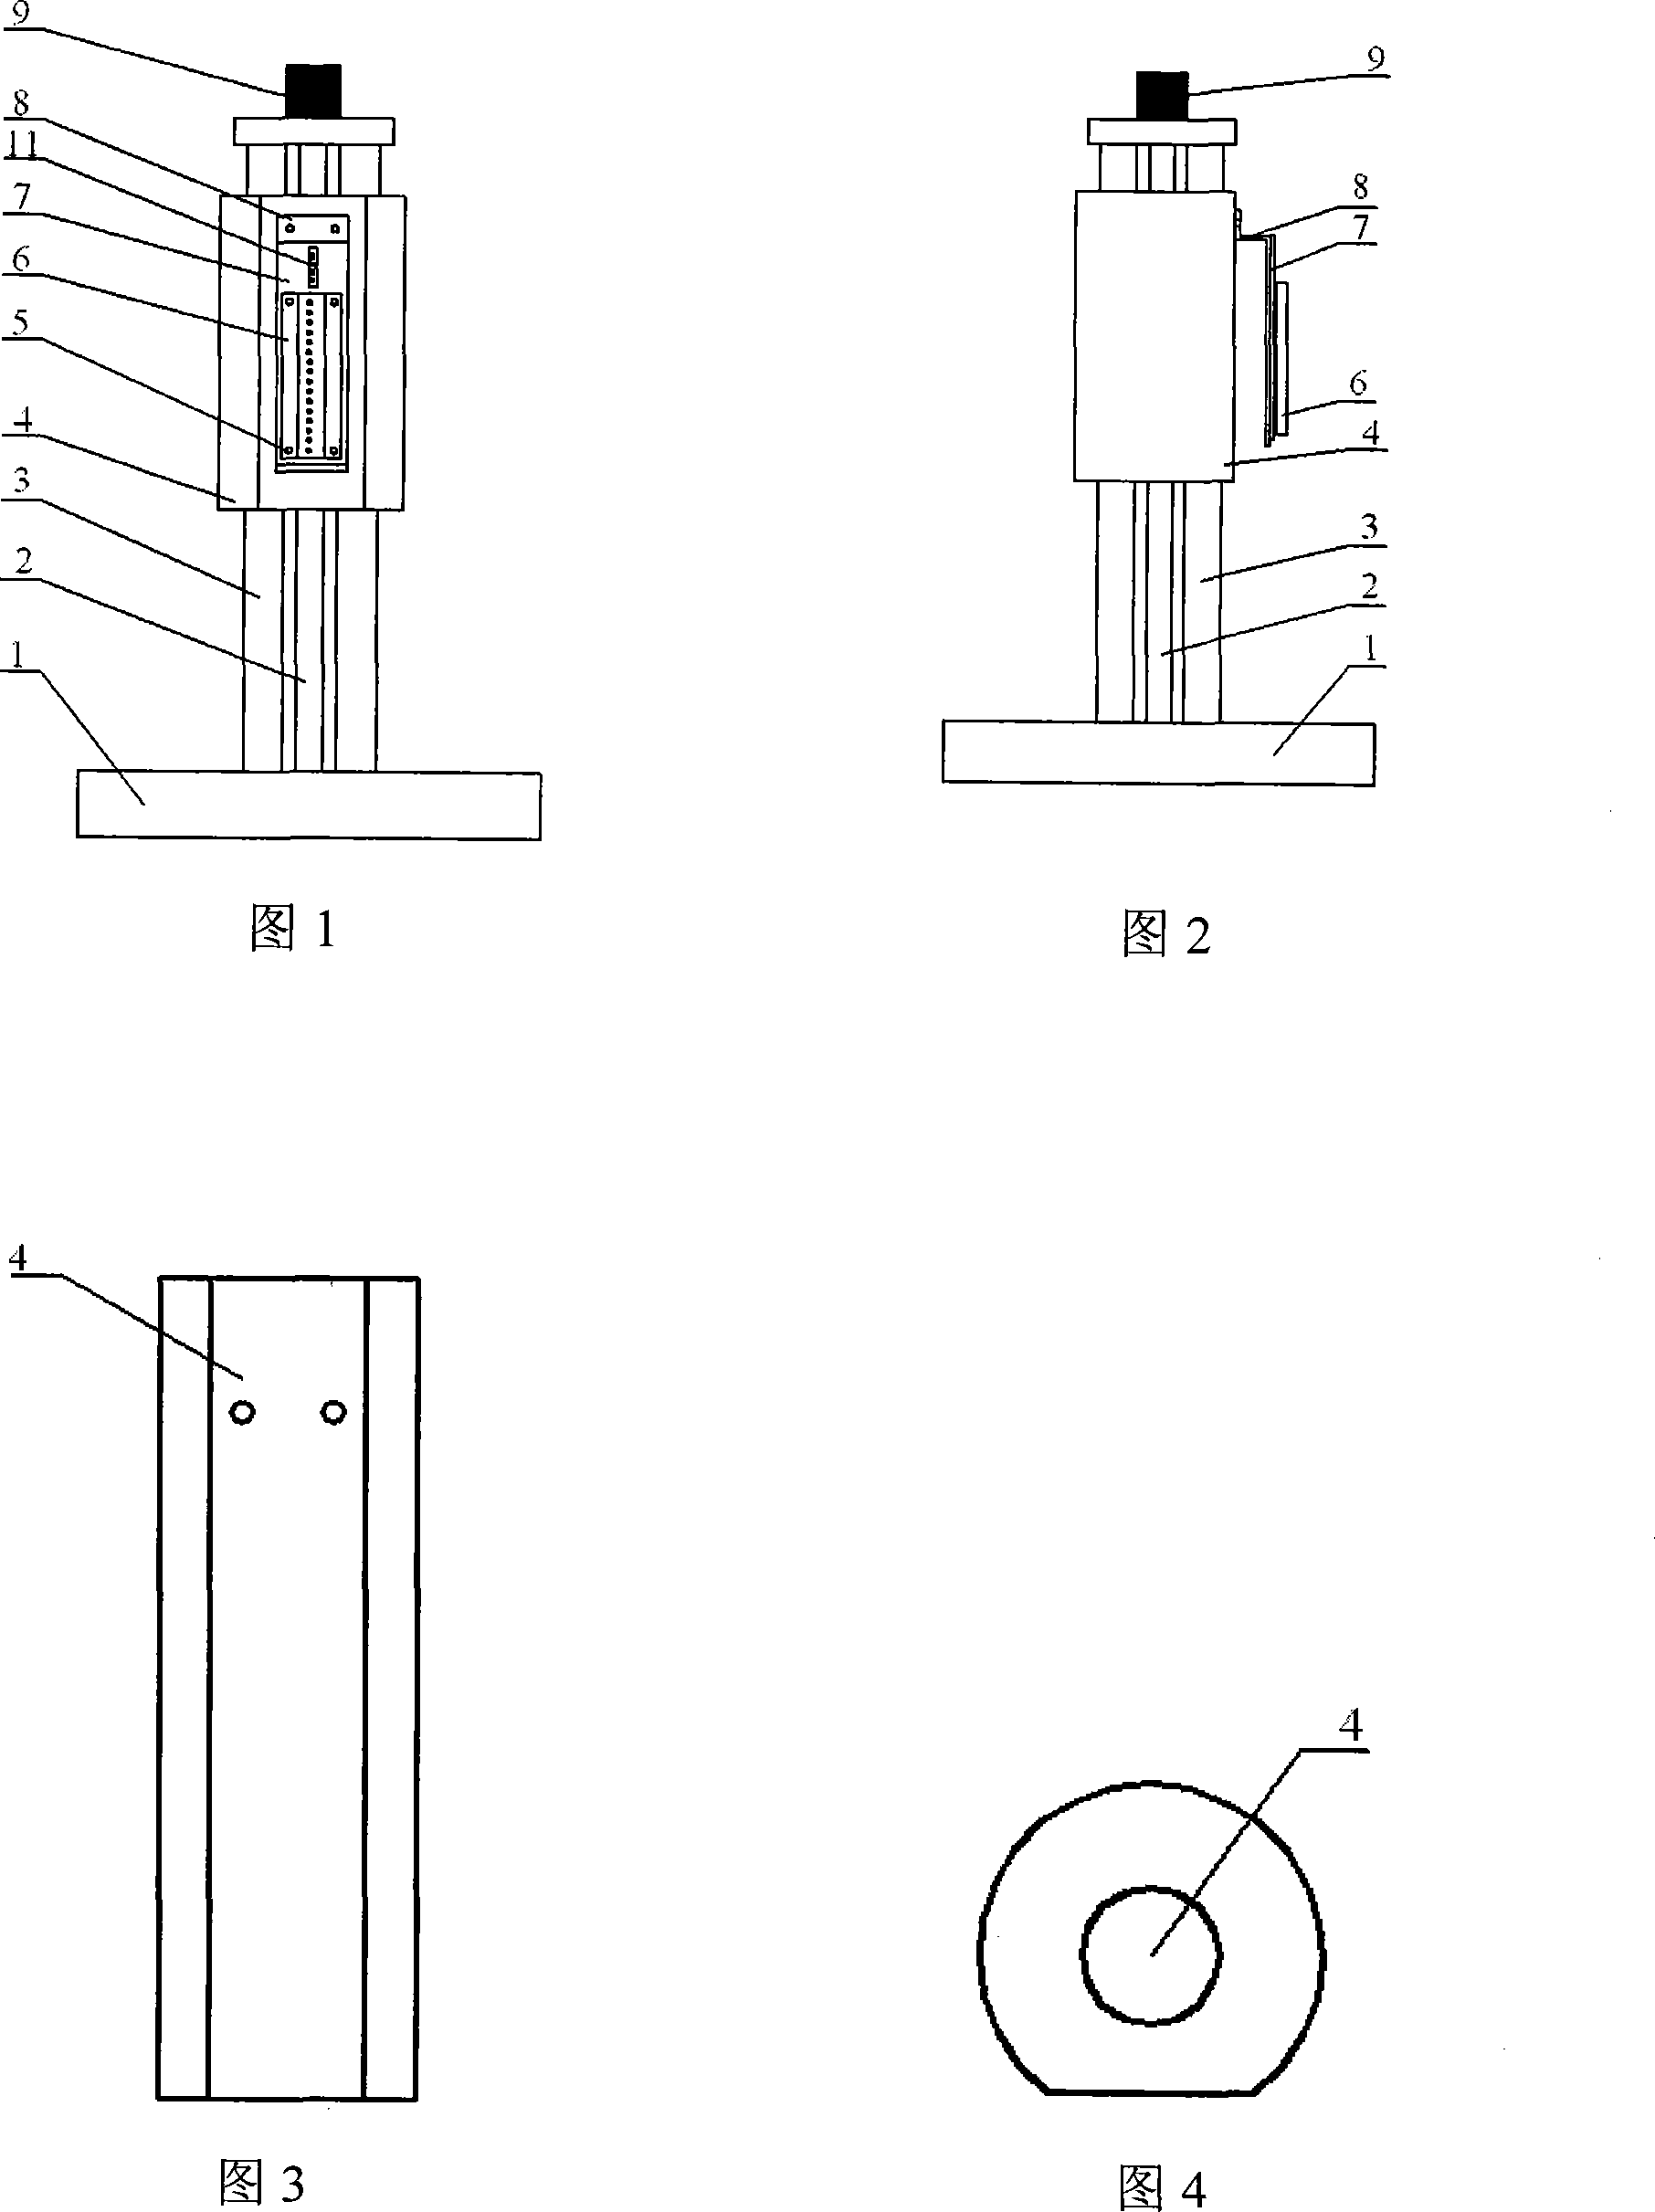 Device for detecting lighter flame height